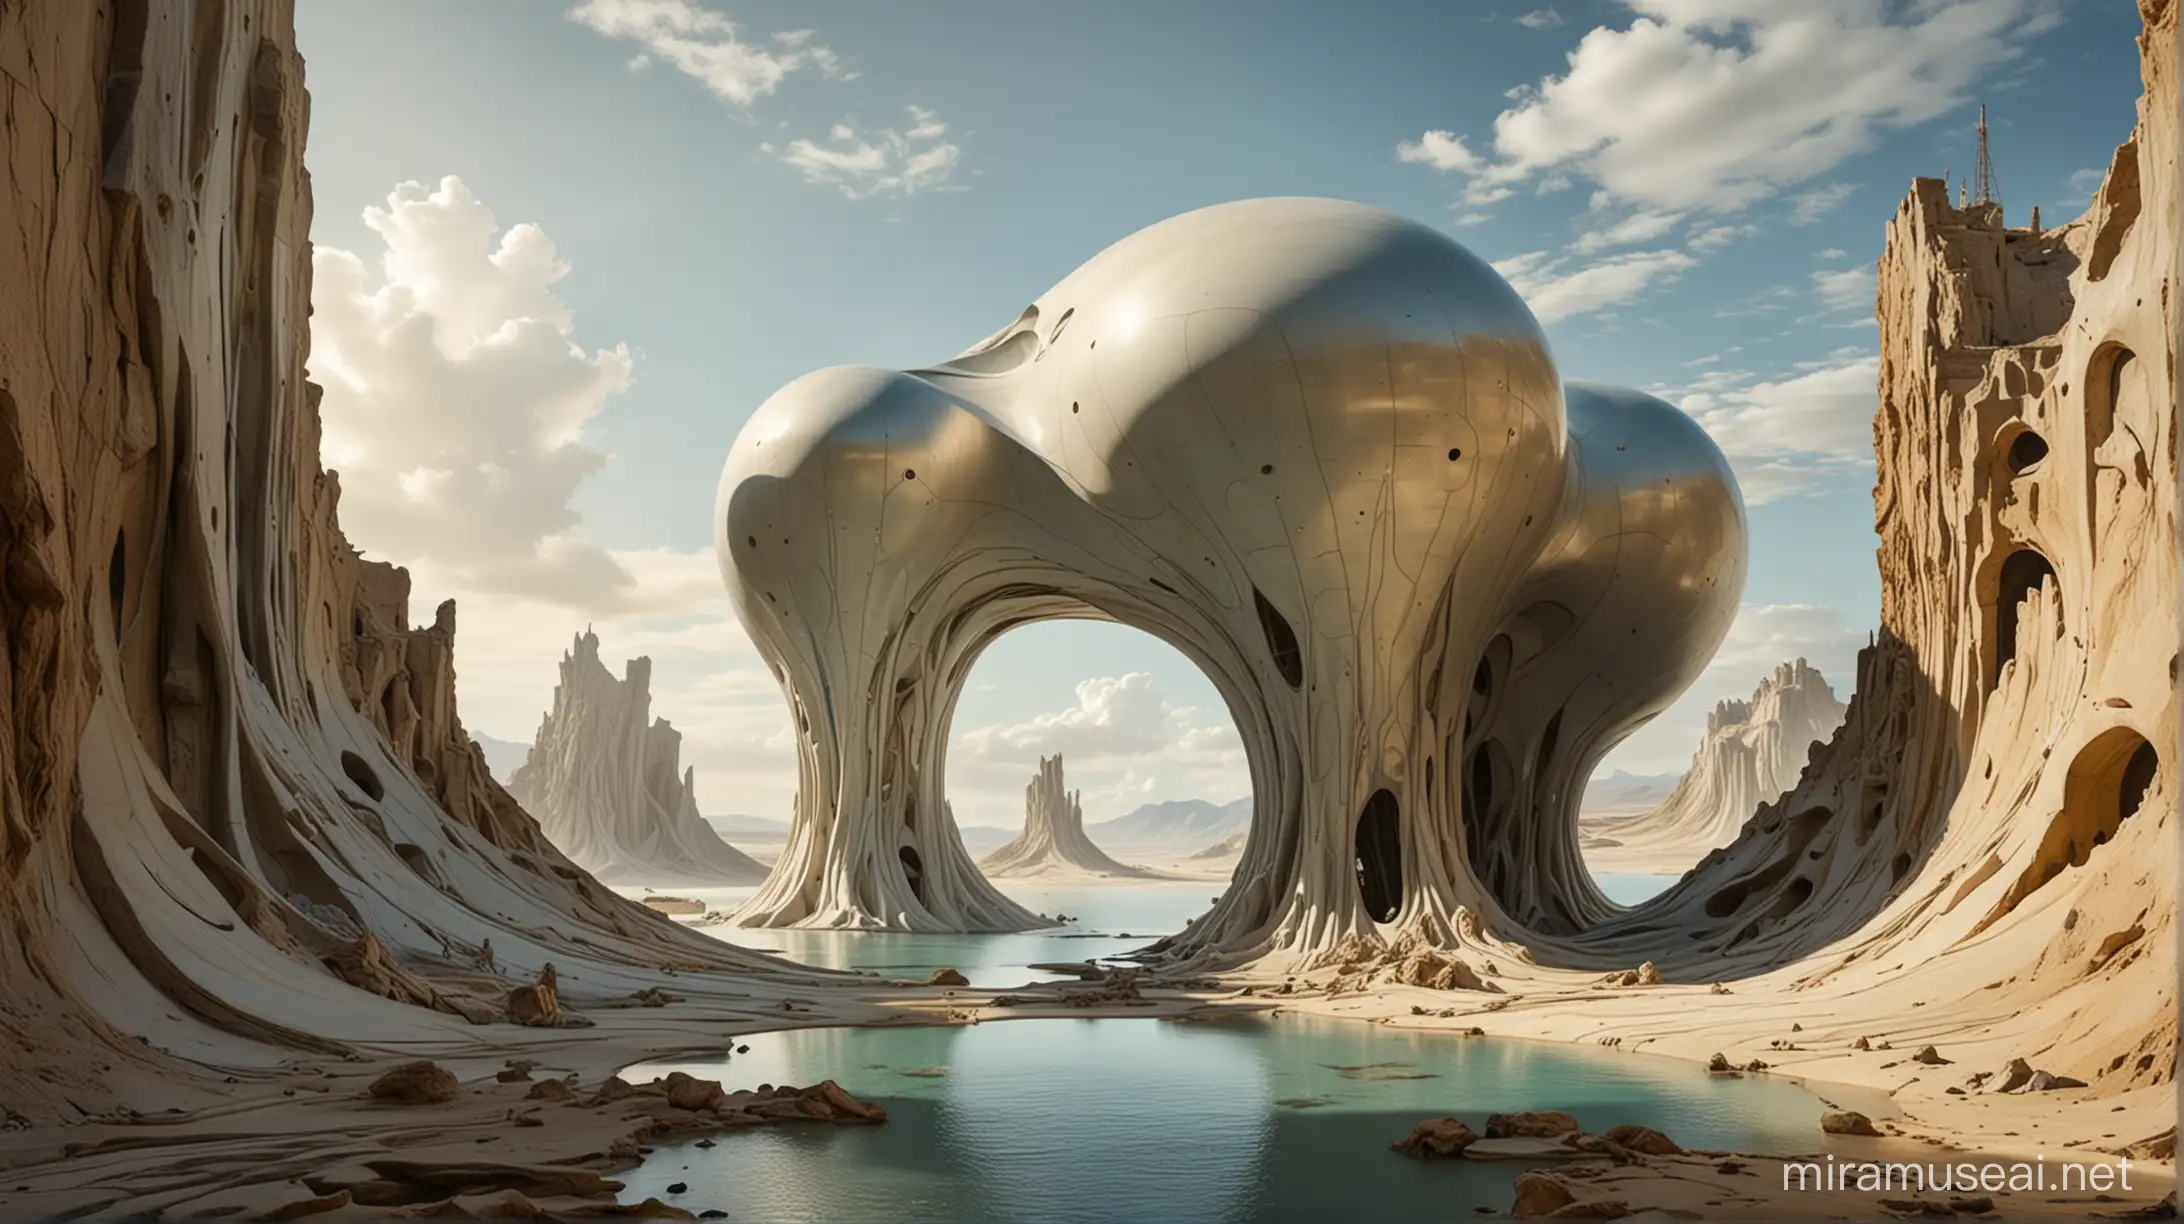 large abstract structures protruding out a surface in a dali-esque environment